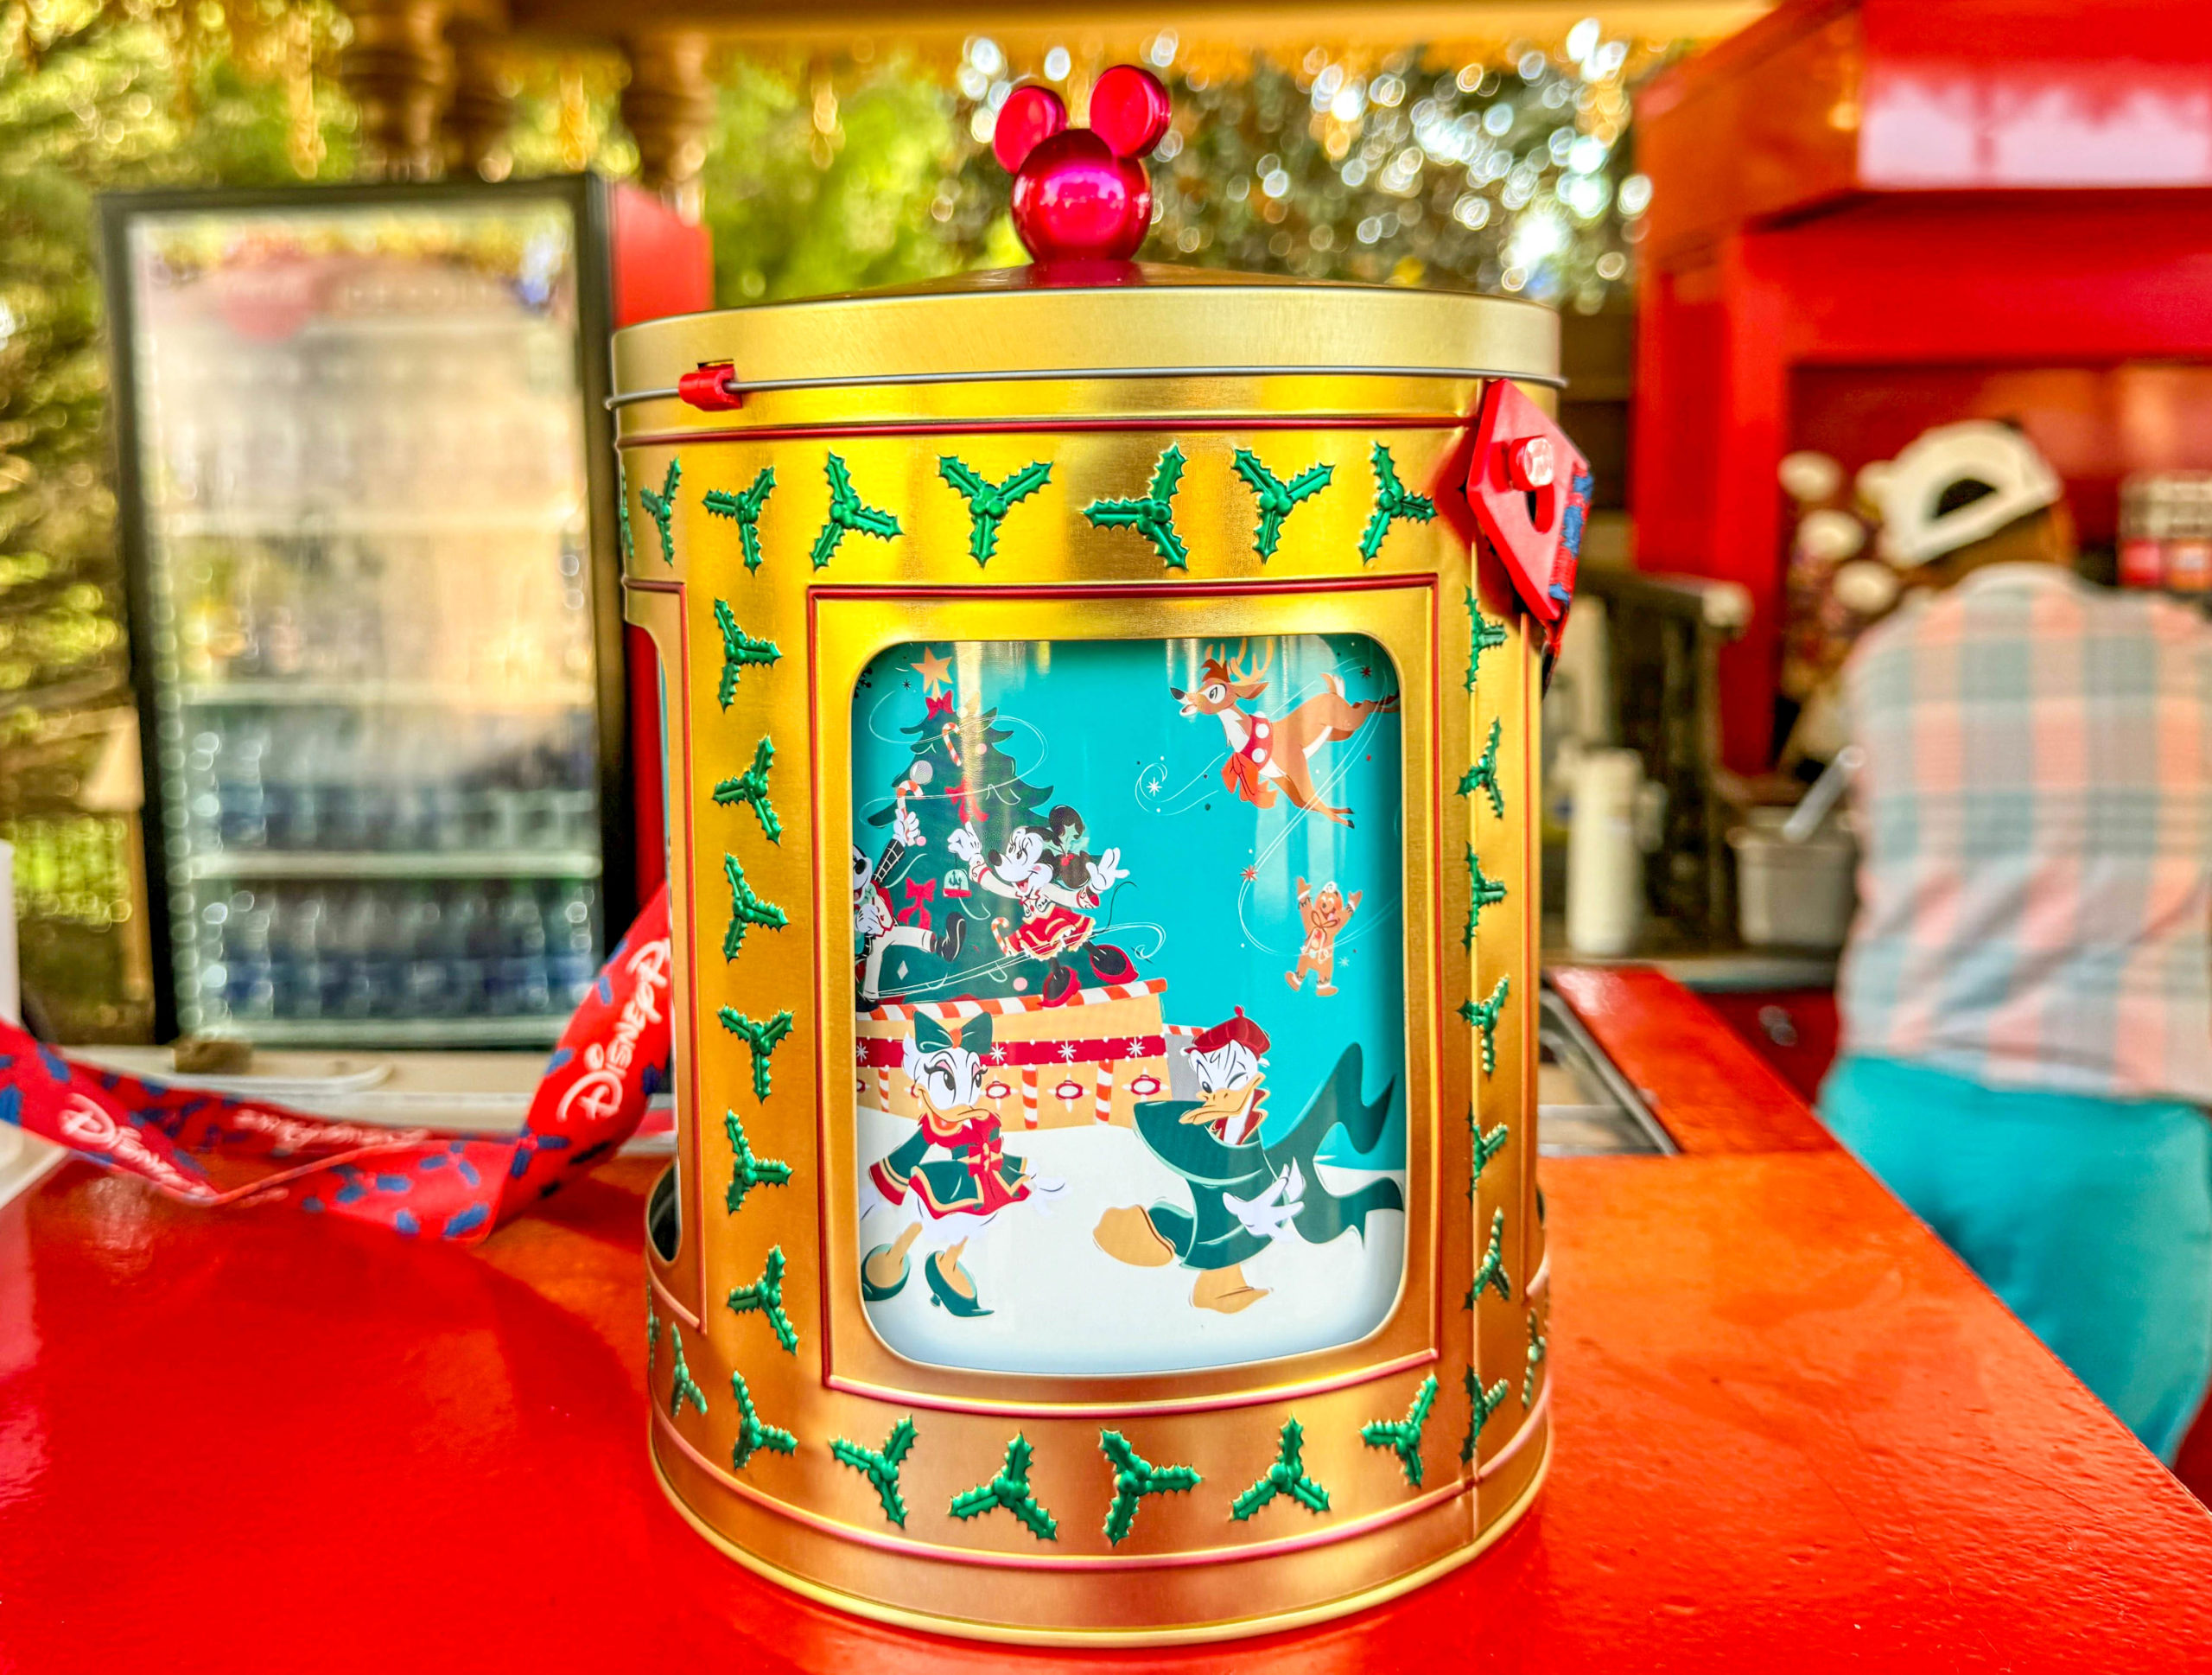 ALERT! A MUSICAL Holiday Popcorn Bucket Is Coming Soon to Disney World and  Disneyland!